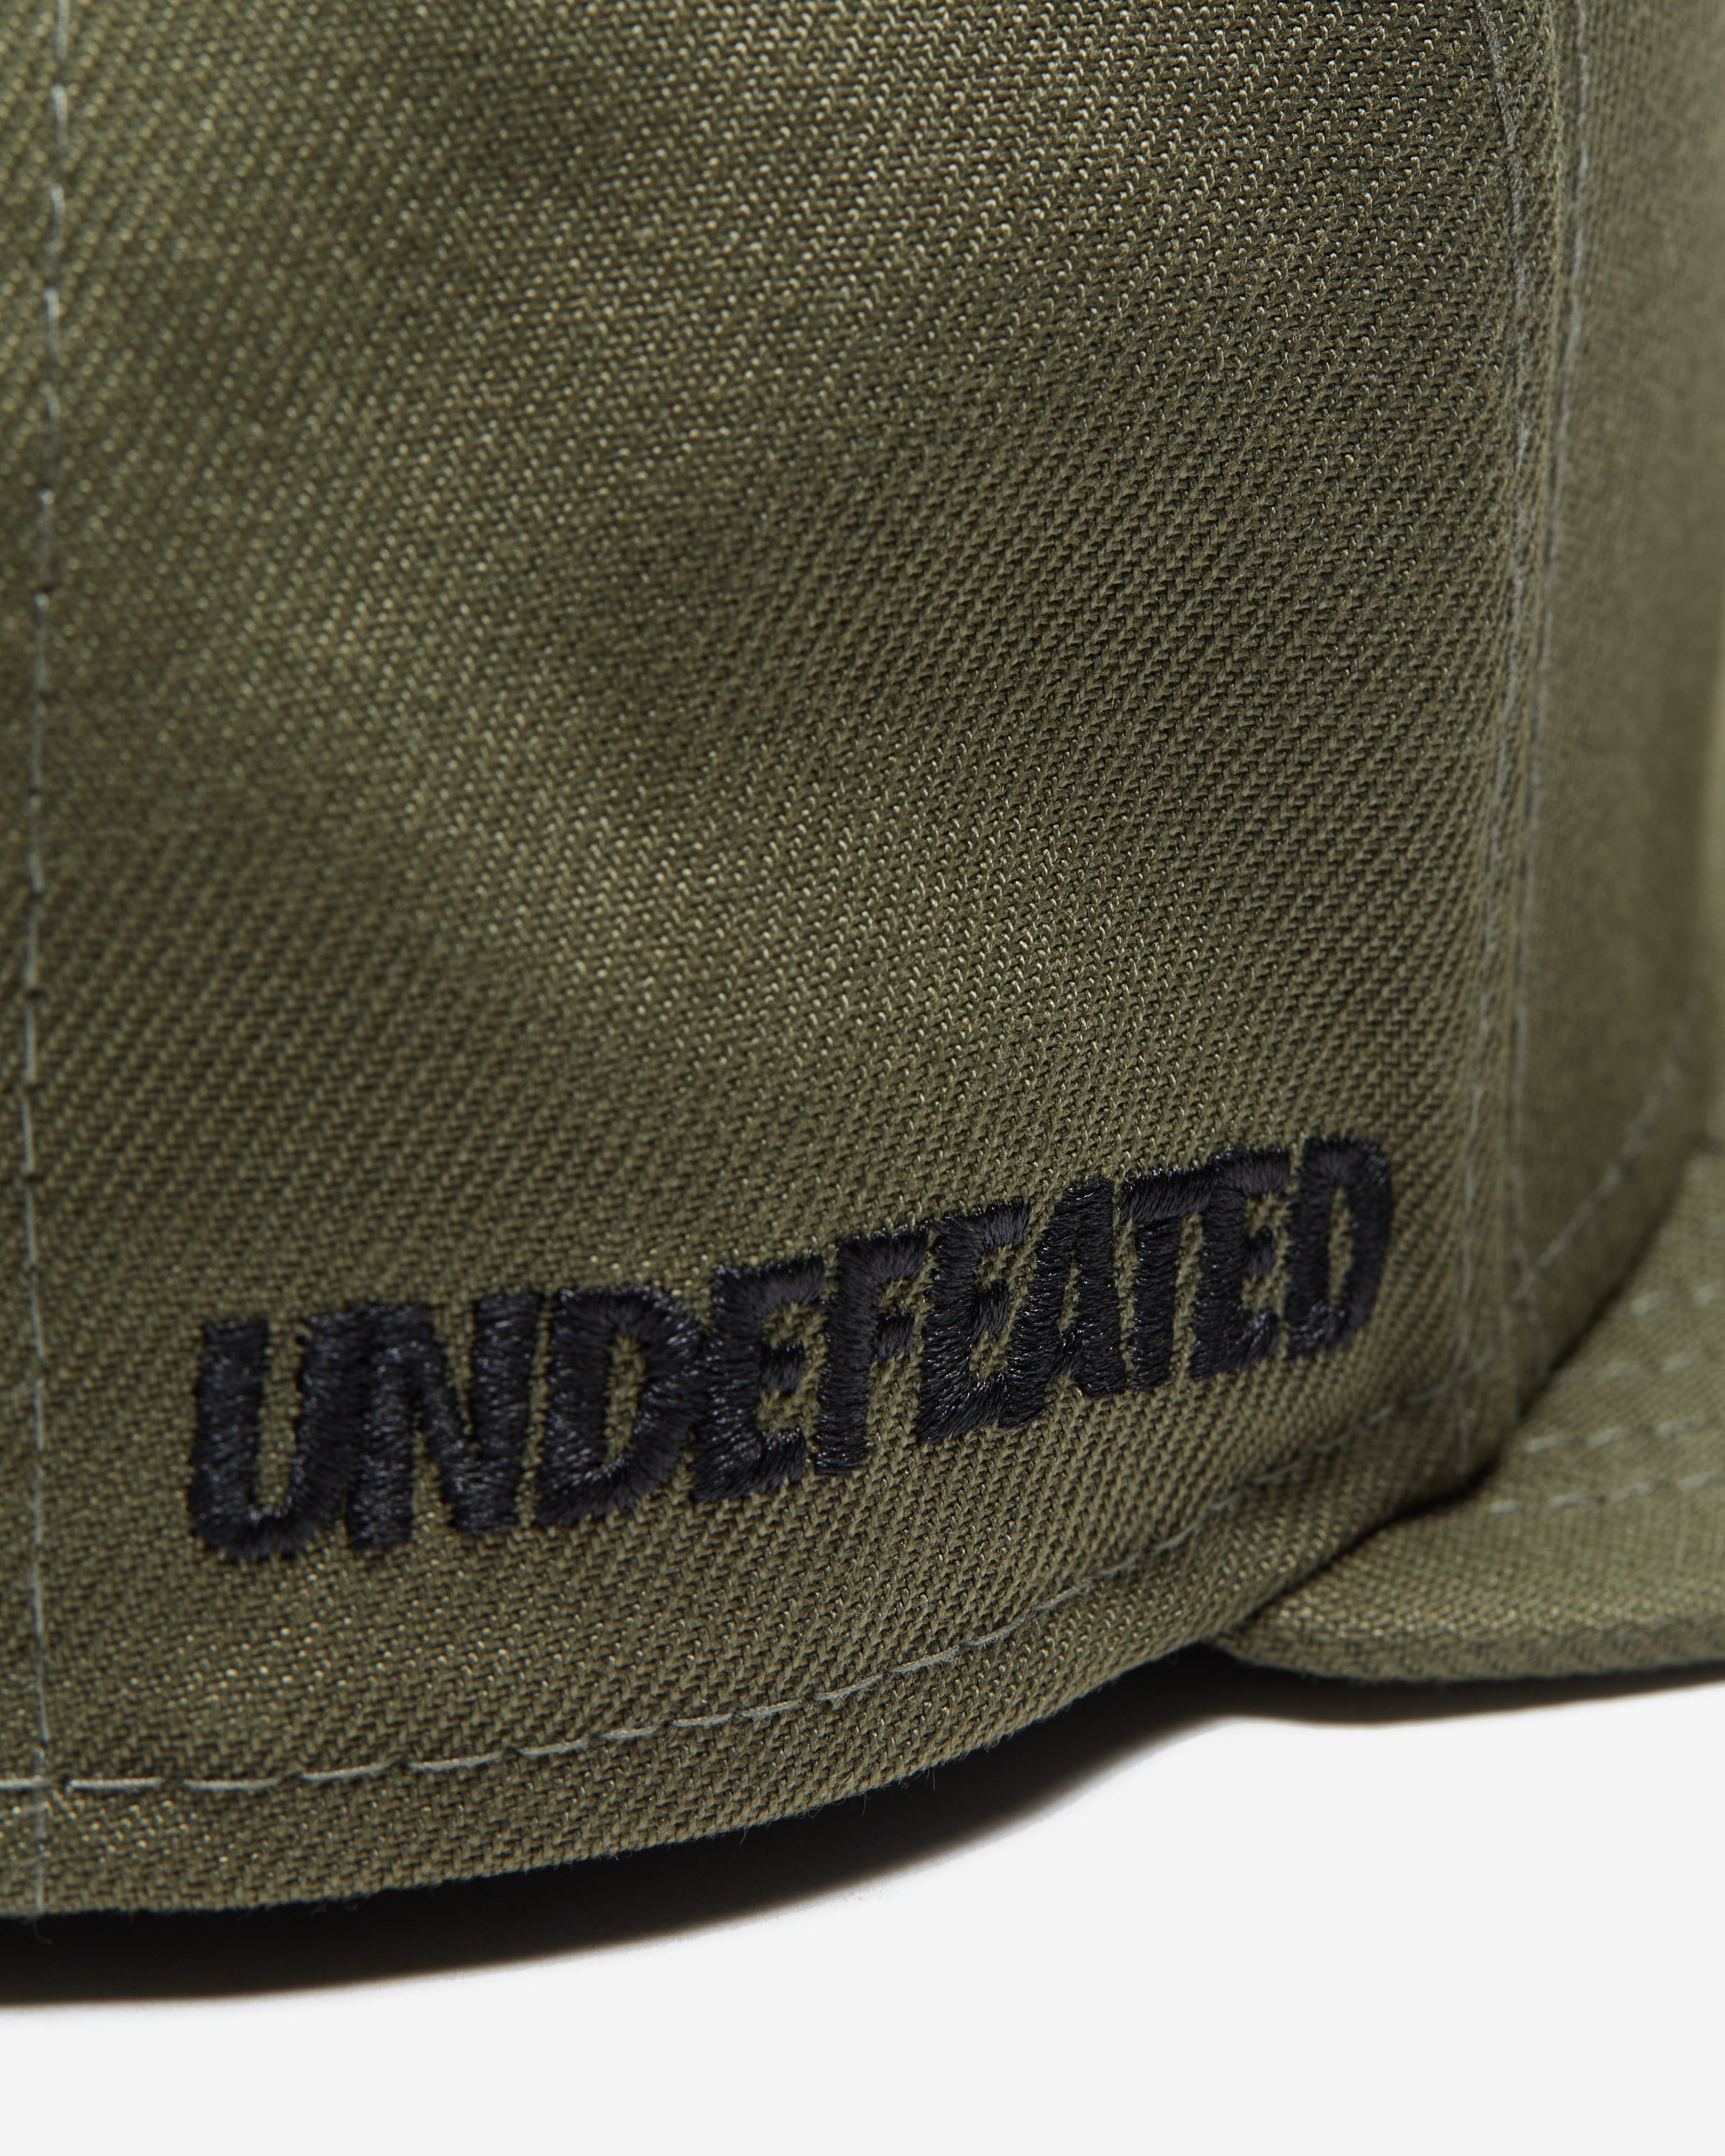 UNDEFEATED X LA DODGERS WORLD CHAMPIONS NEW ERA 59FIFTY FITTED – Undefeated